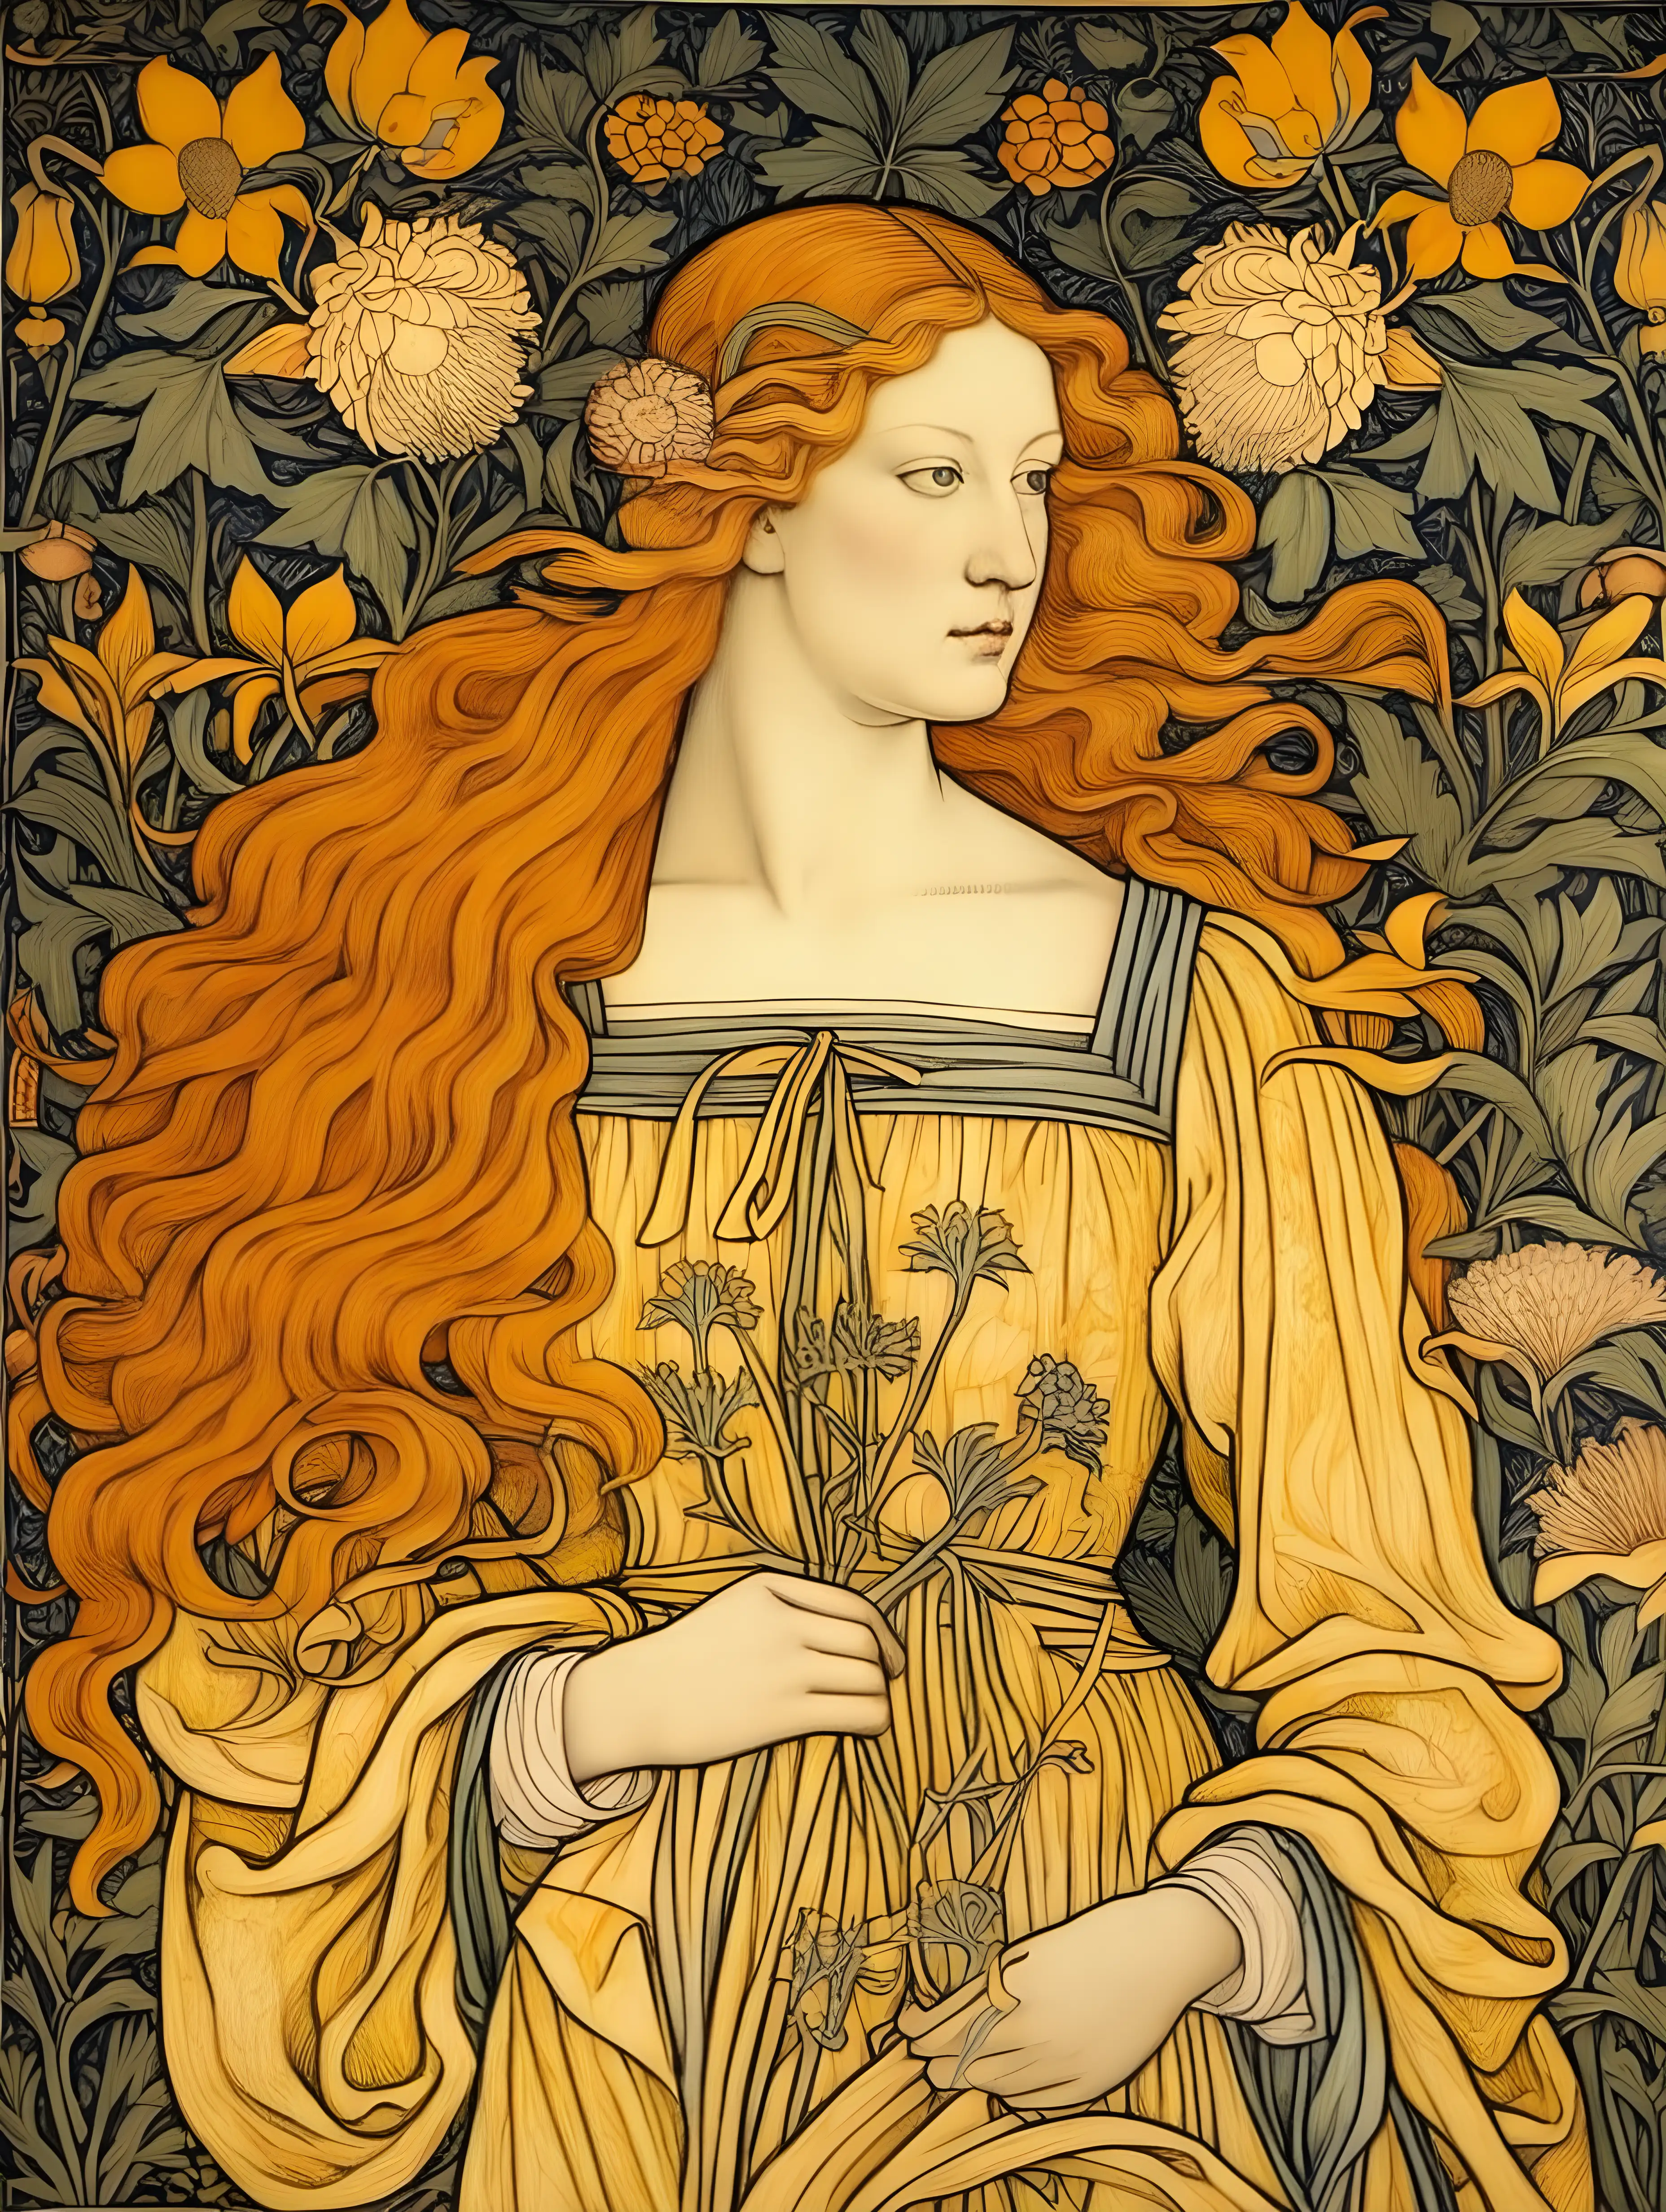 William morris portrait of a woman with long ginger hair wit flowers in yellow and orange hues